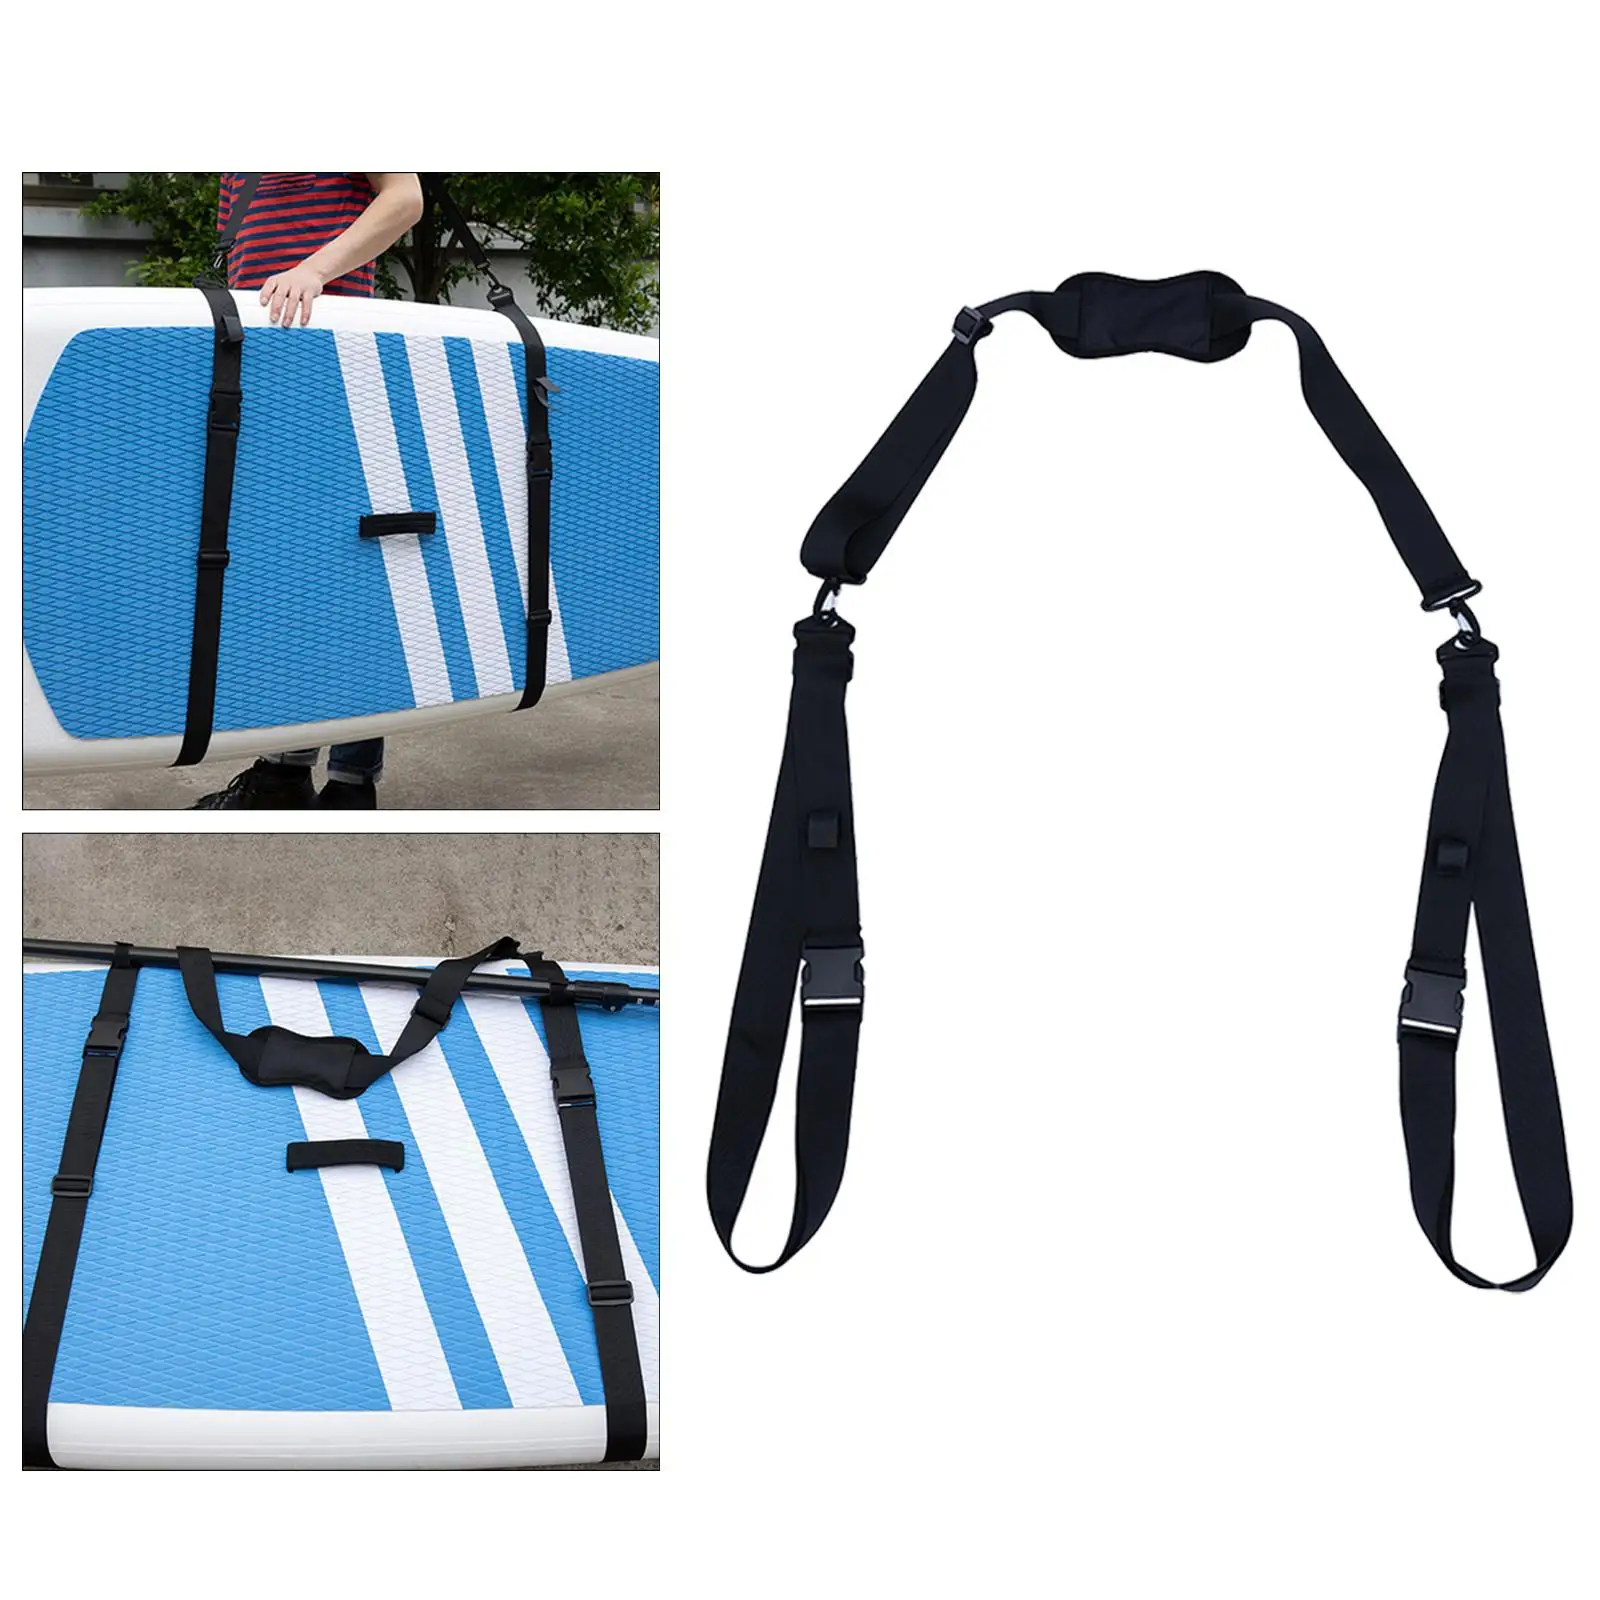 Paddleboard Carry Strap,  Board Carrier Storage  for Surfboards, Paddleboards and Kayaks, Adjustable Heavy-Duty Carrying Belt